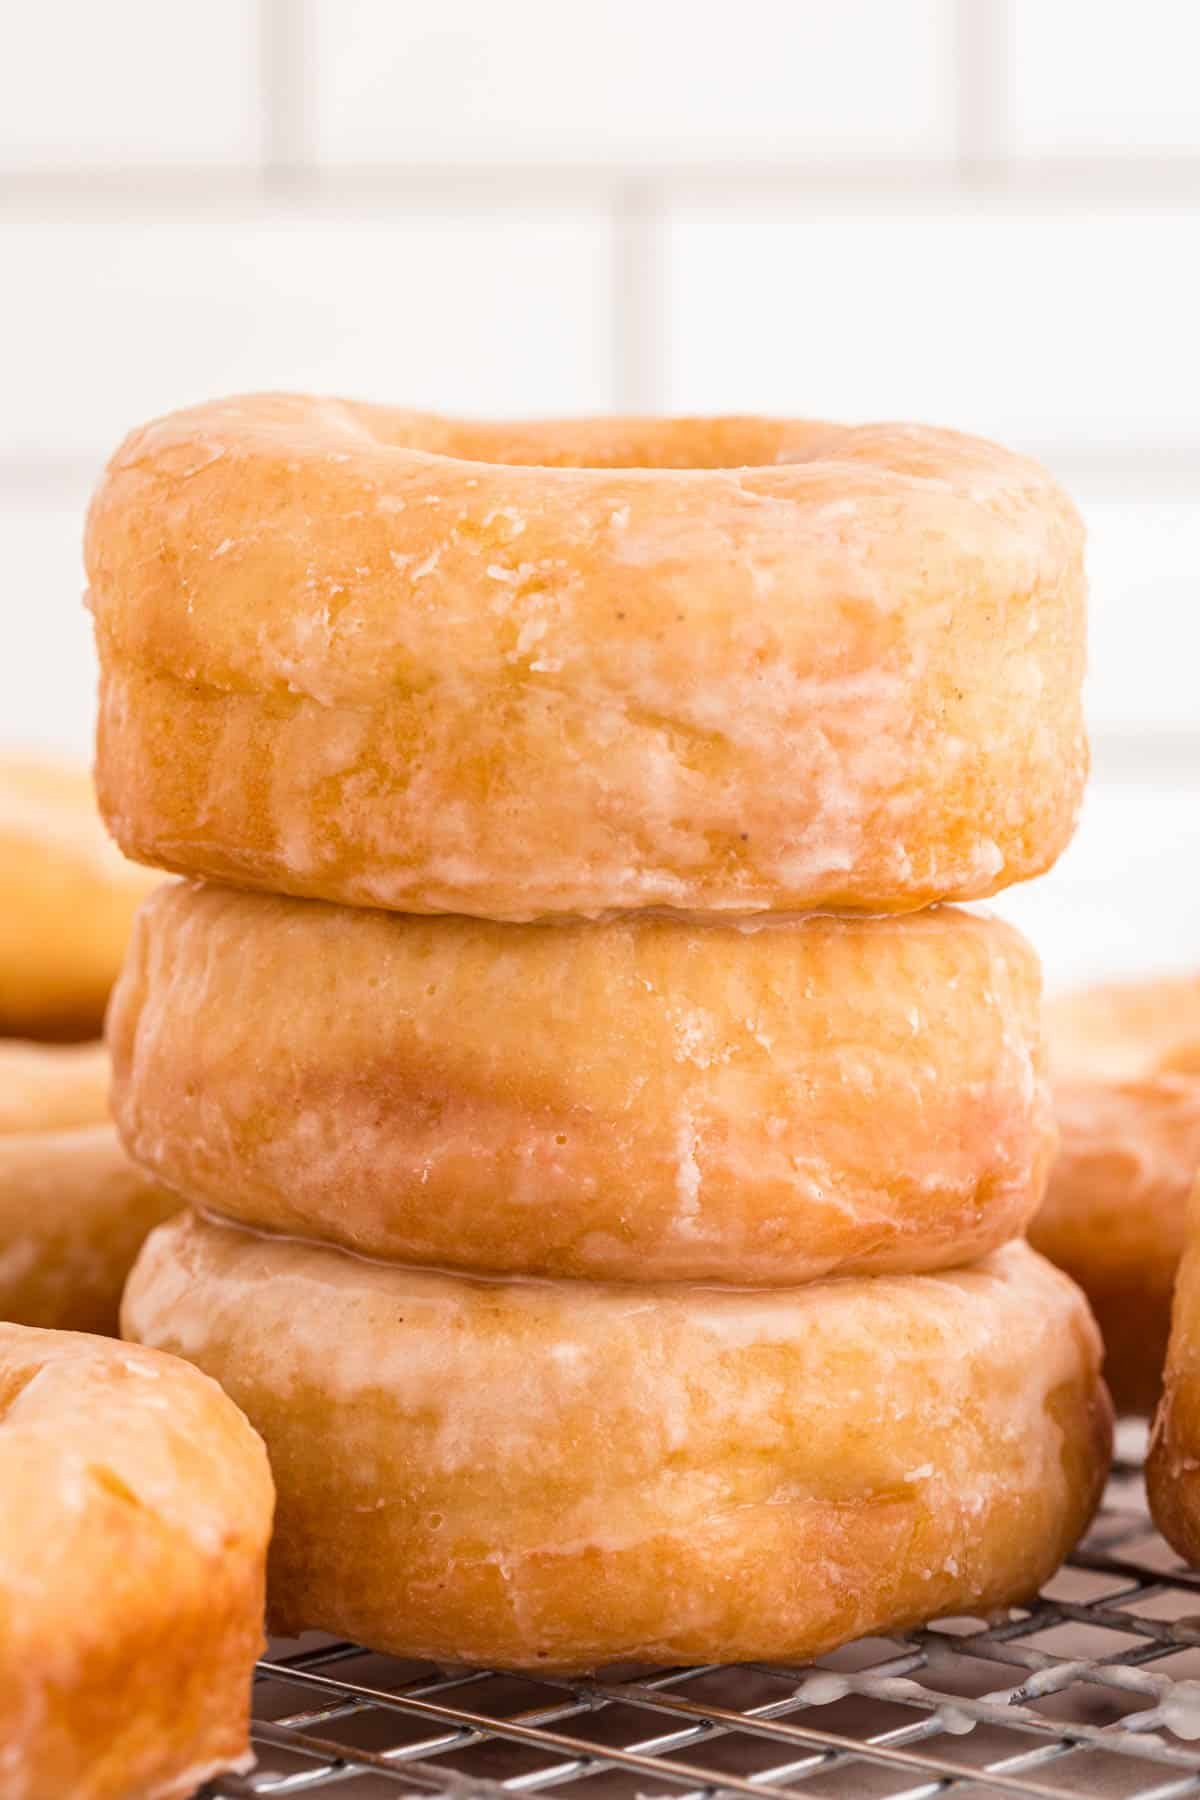 A stack of three glazed donuts on a wire rack.